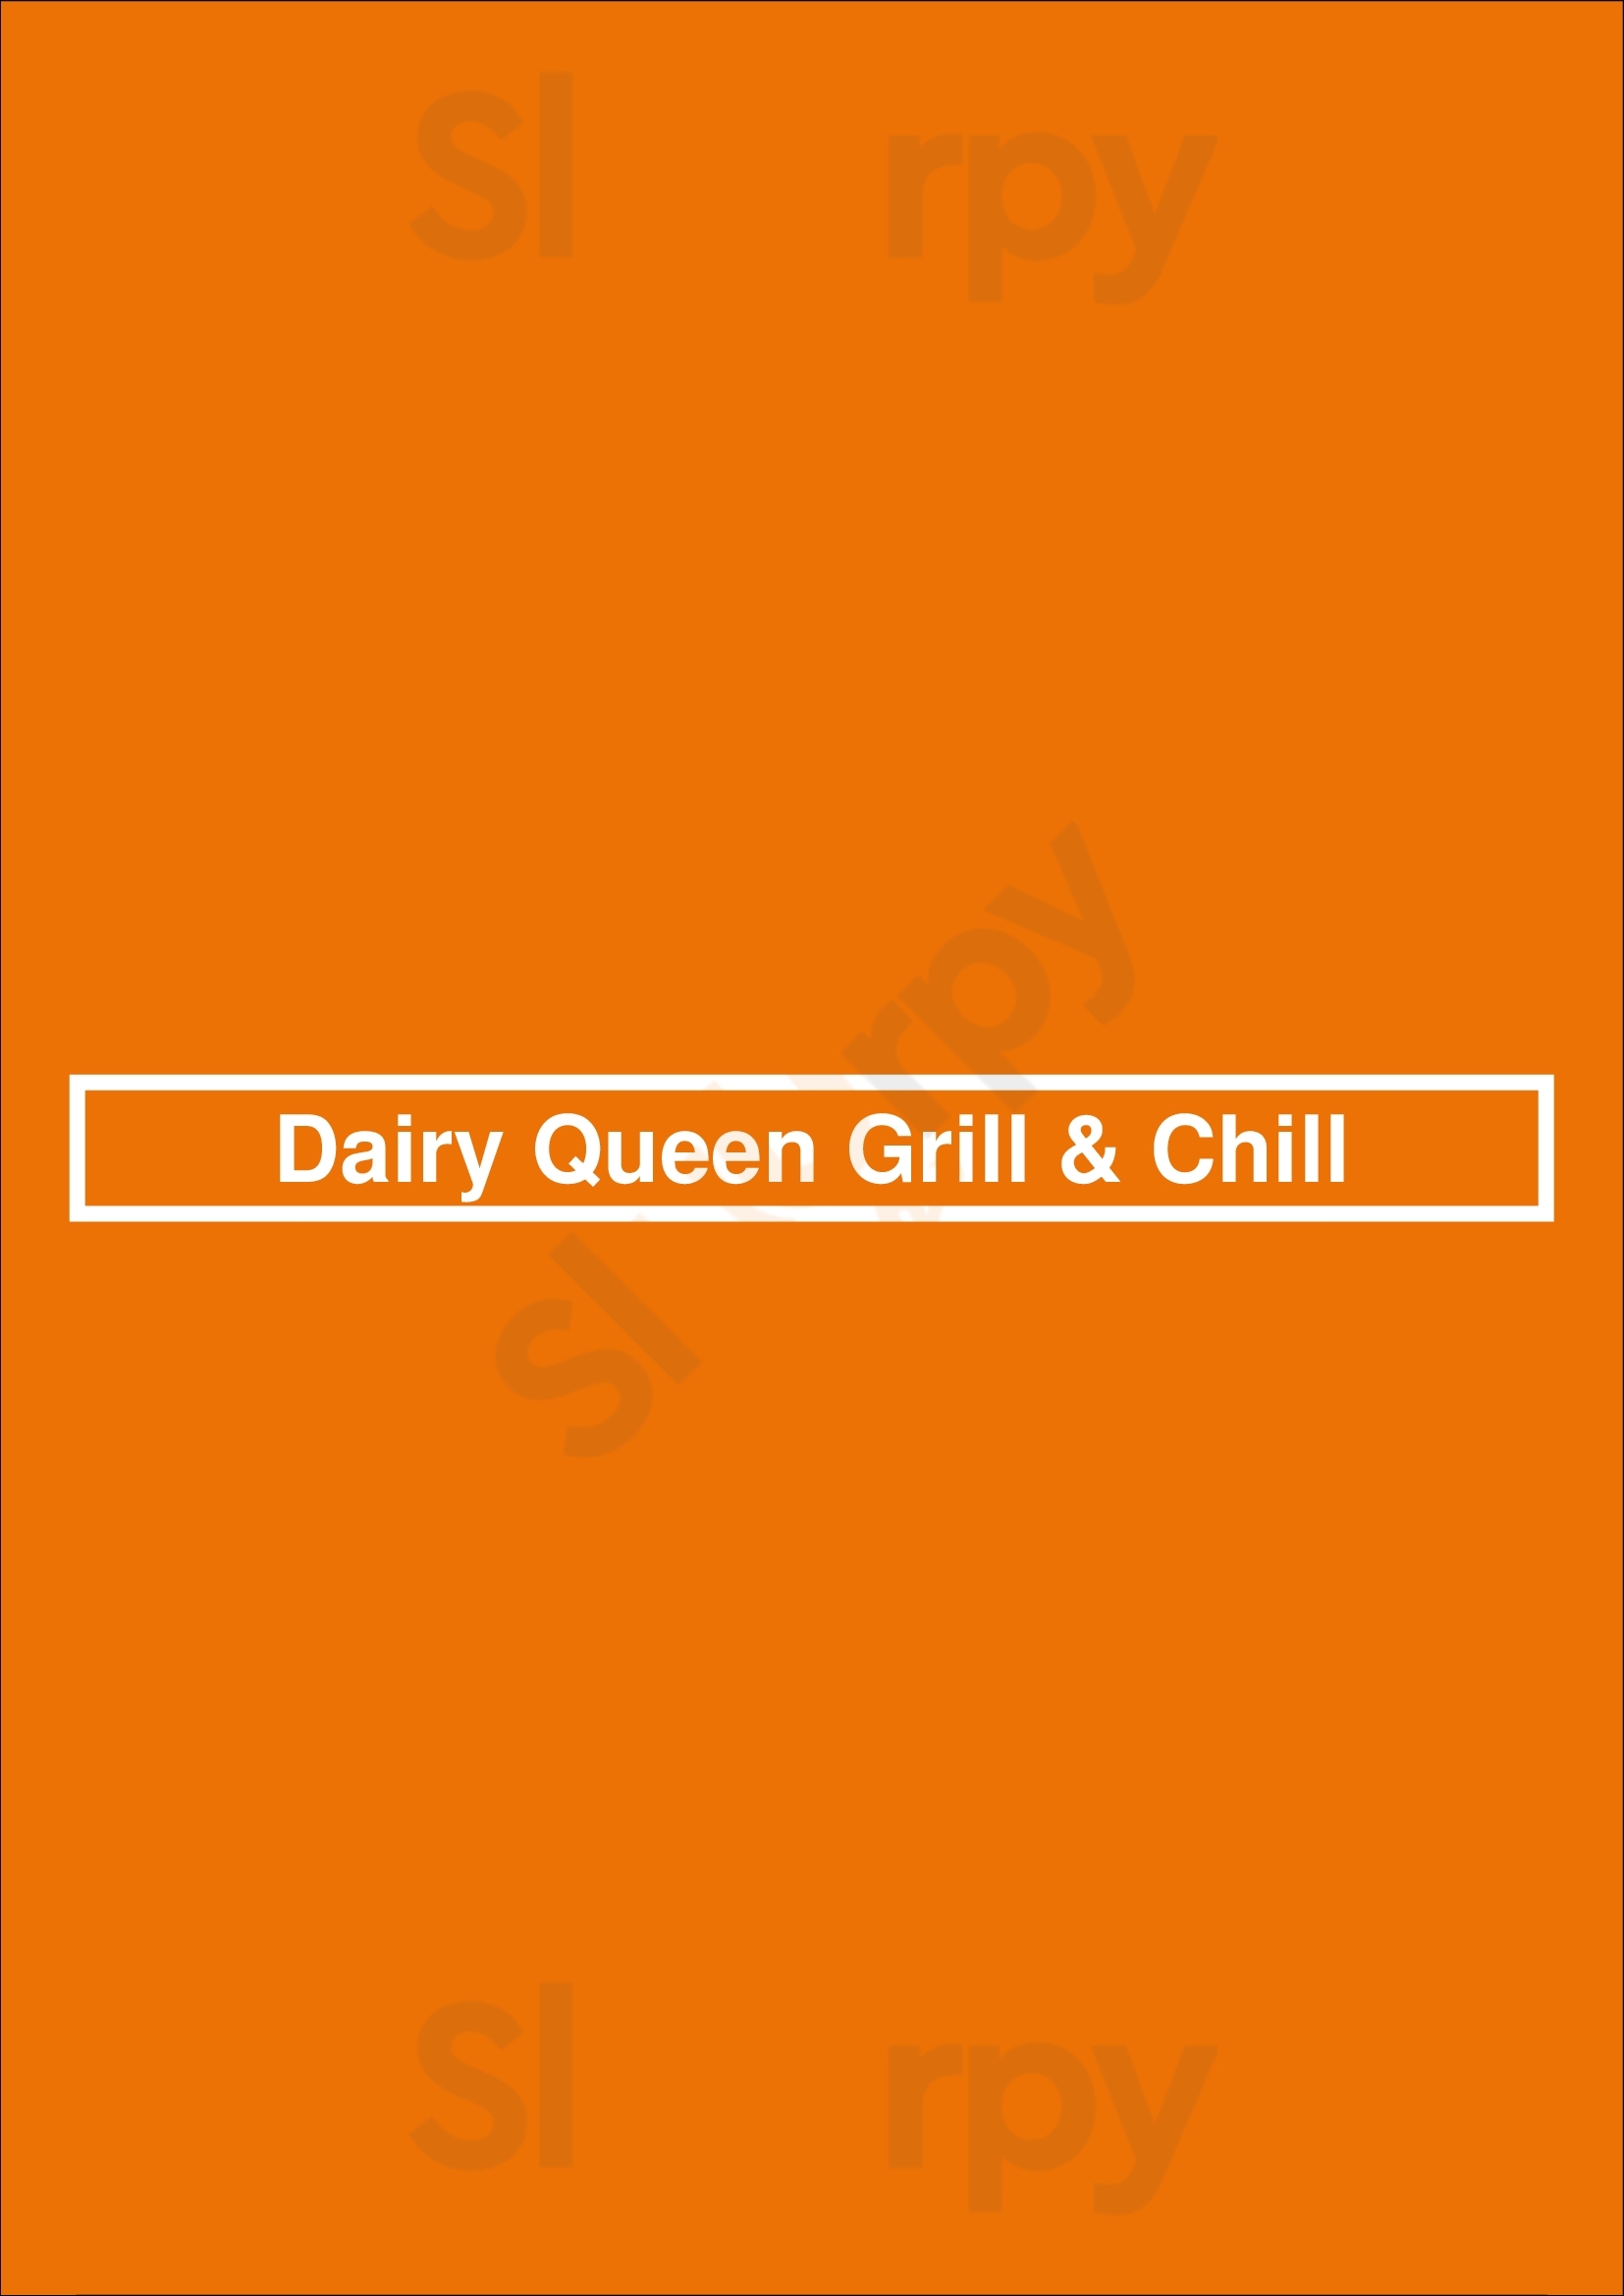 Dairy Queen Grill & Chill Fayetteville Menu - 1